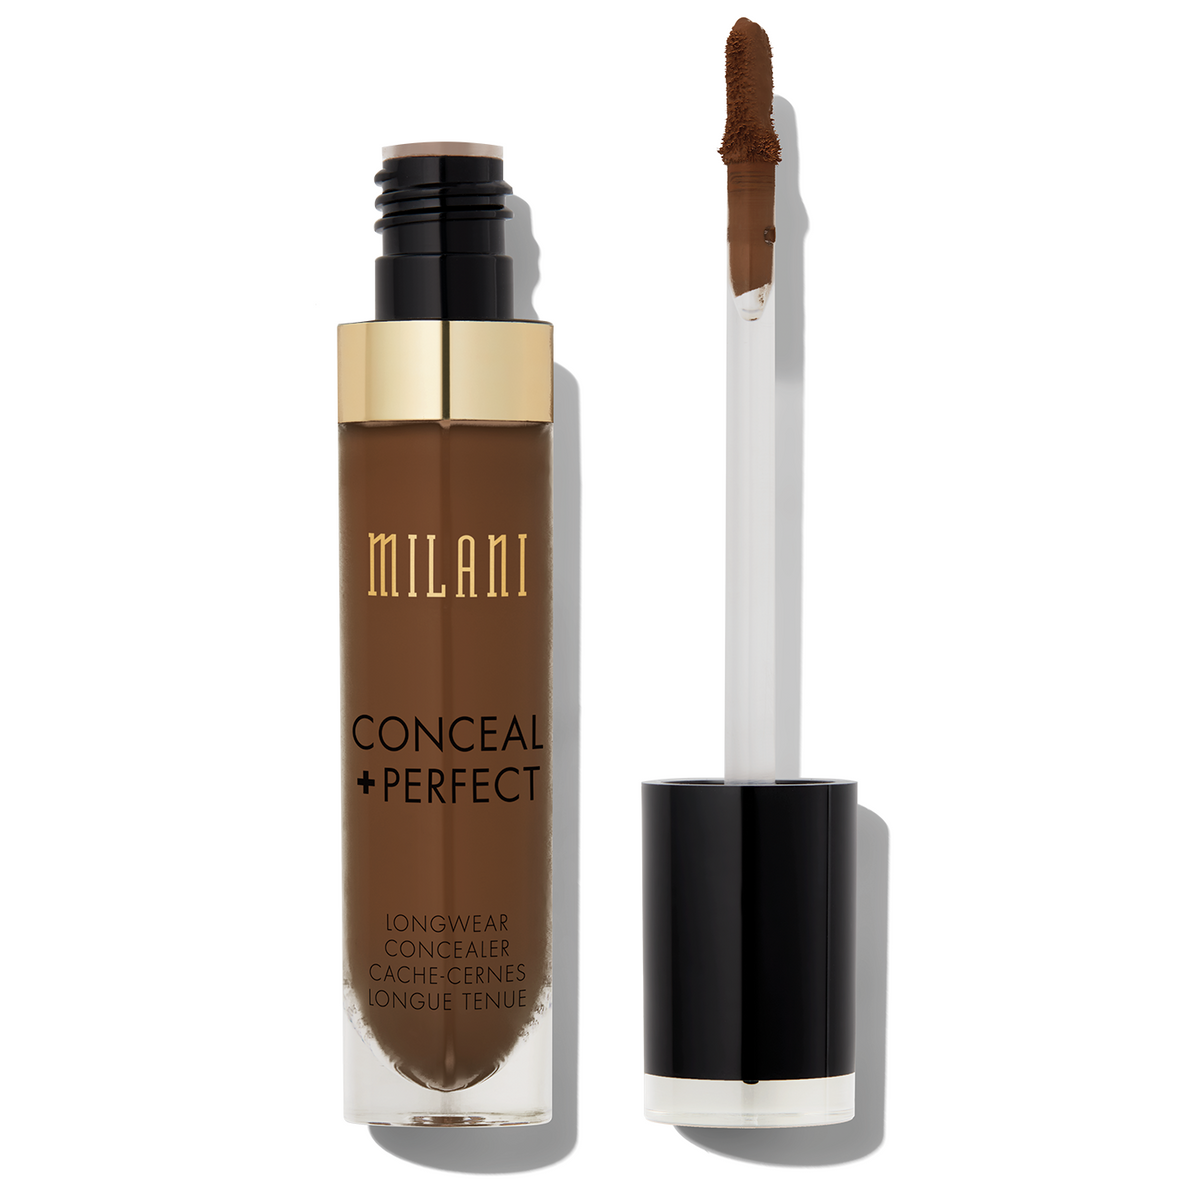 MILANI Conceal + Perfect Long-Wear Concealer - Cool Cocoa #185